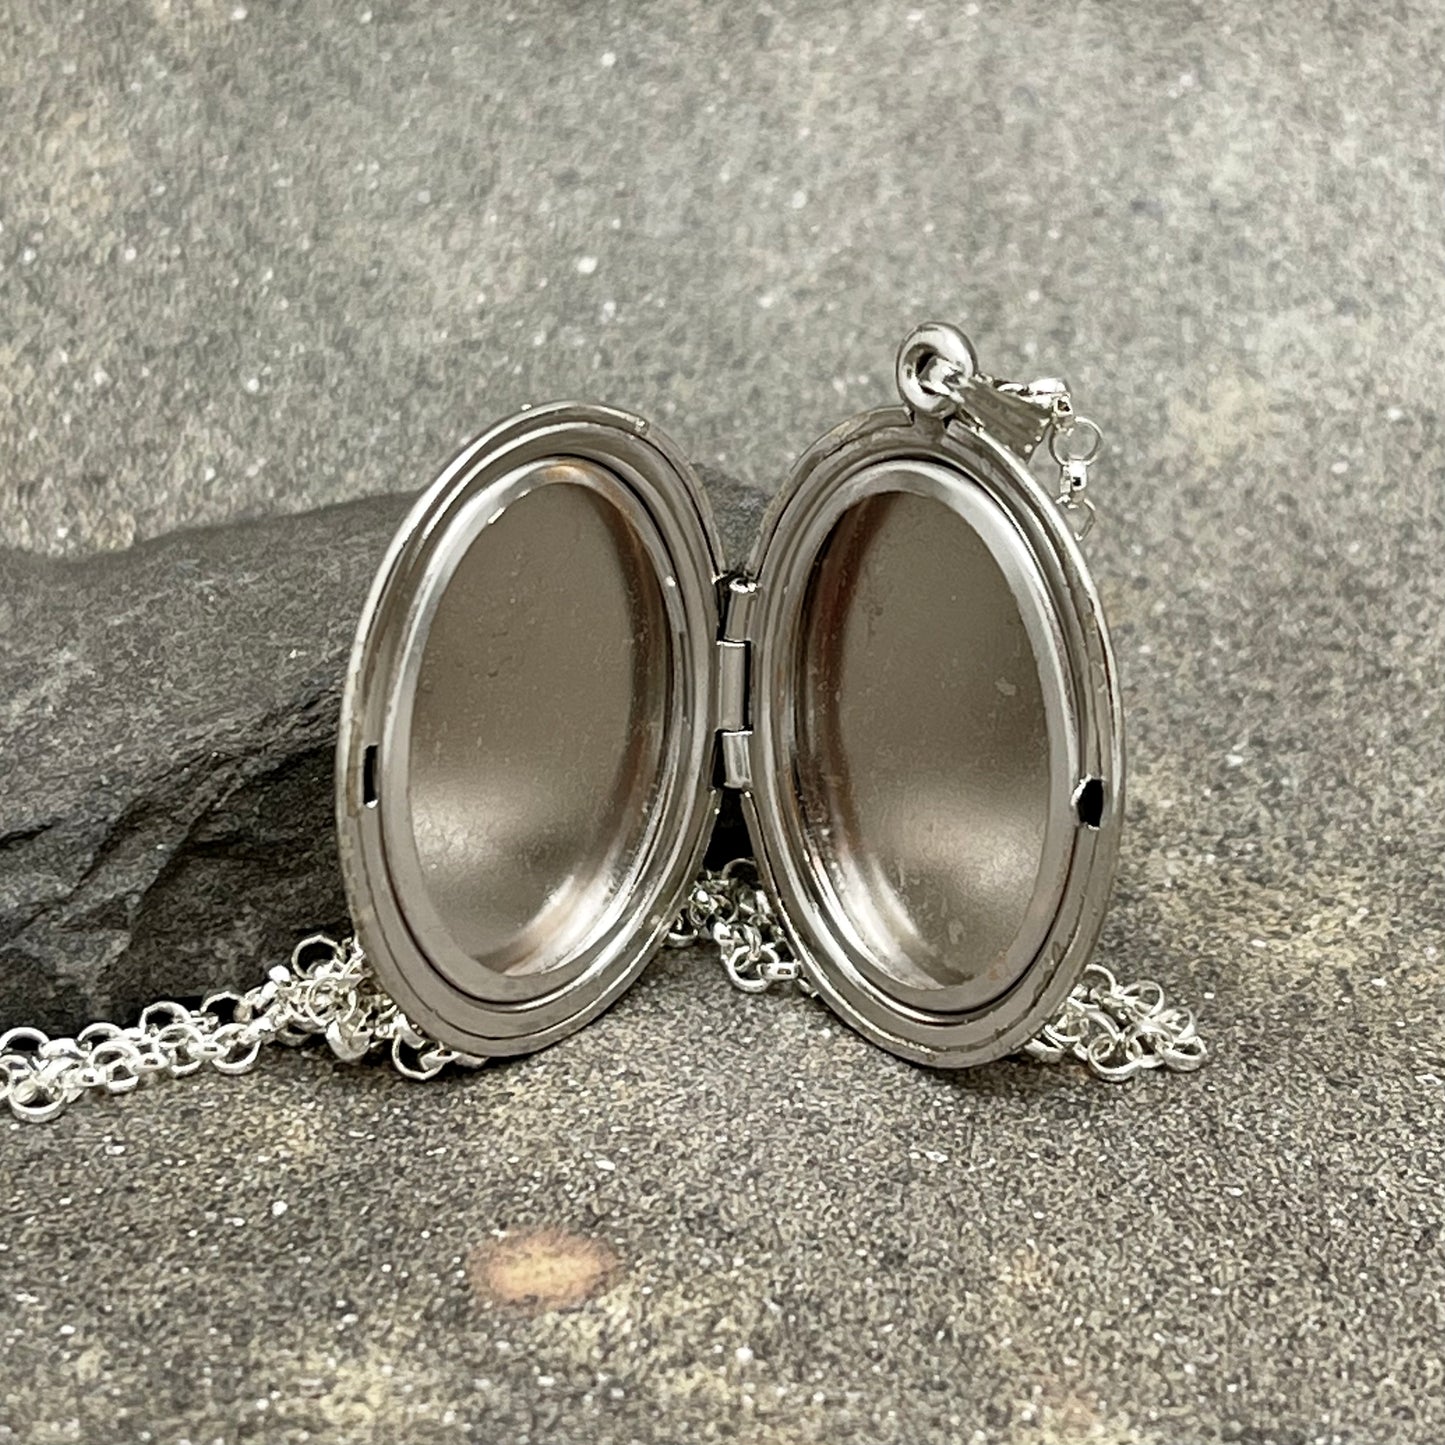 Vintage Oval Locket with chain - Sterling Silver